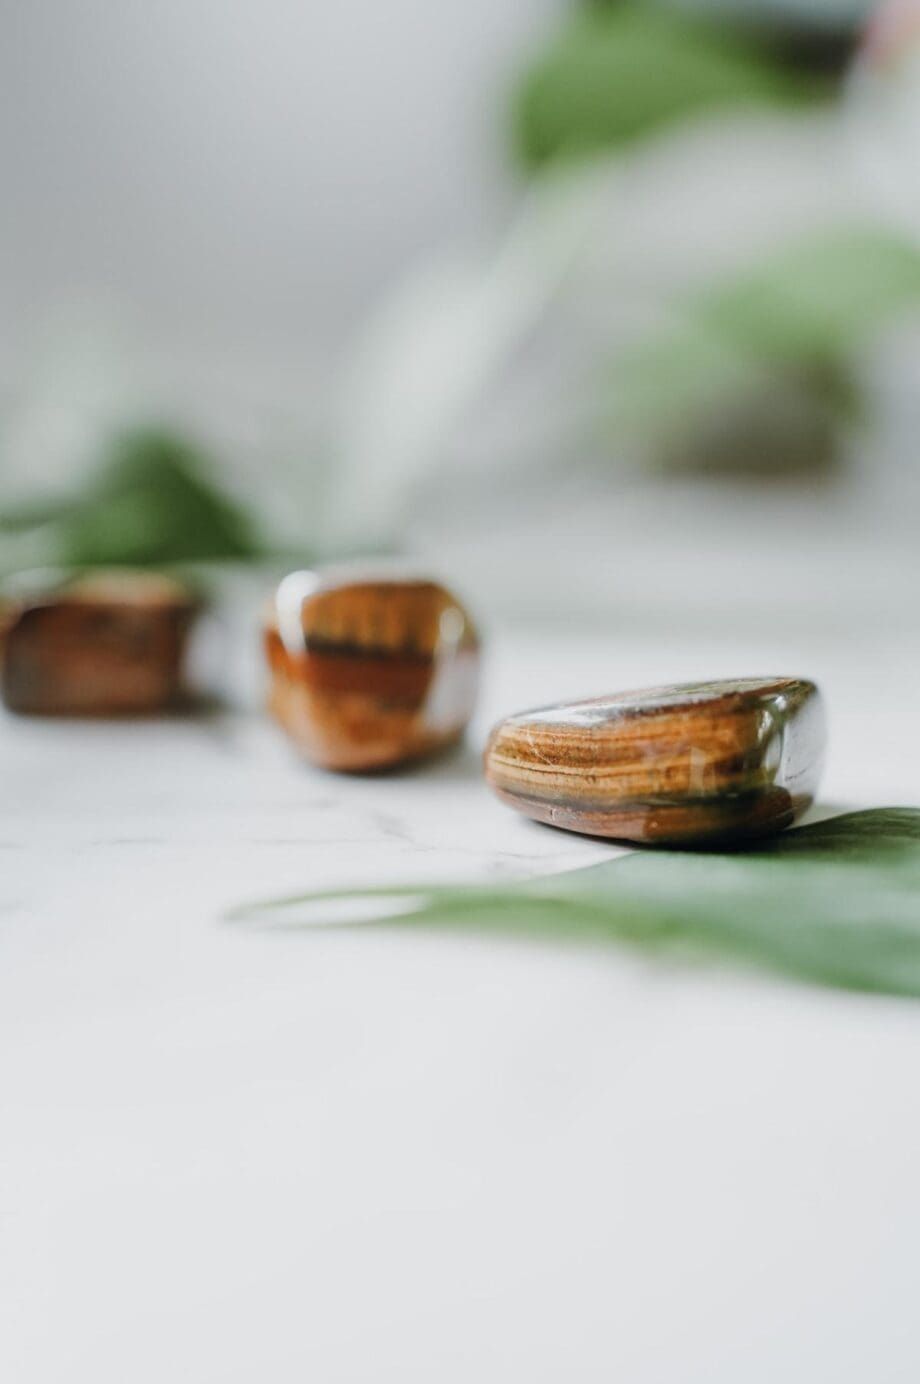 Combine the power of Tiger's Eye with the art of affirmations to unlock your inner strength. Our list of 111 Tiger's Eye Affirmations can help.